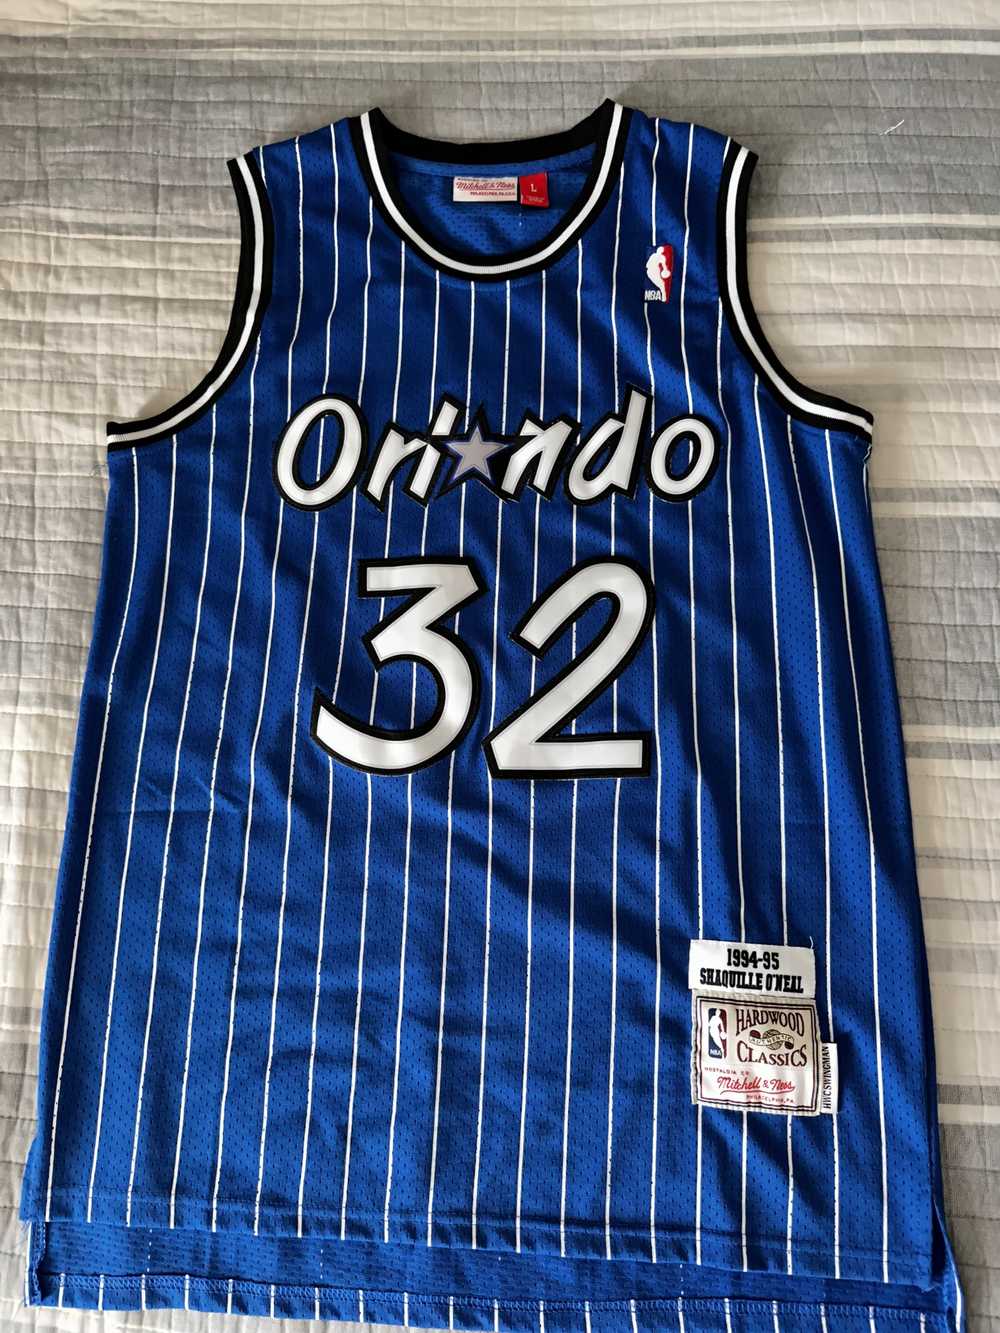 Mitchell & Ness Shaquille O'neal Magic Jersey - image 1